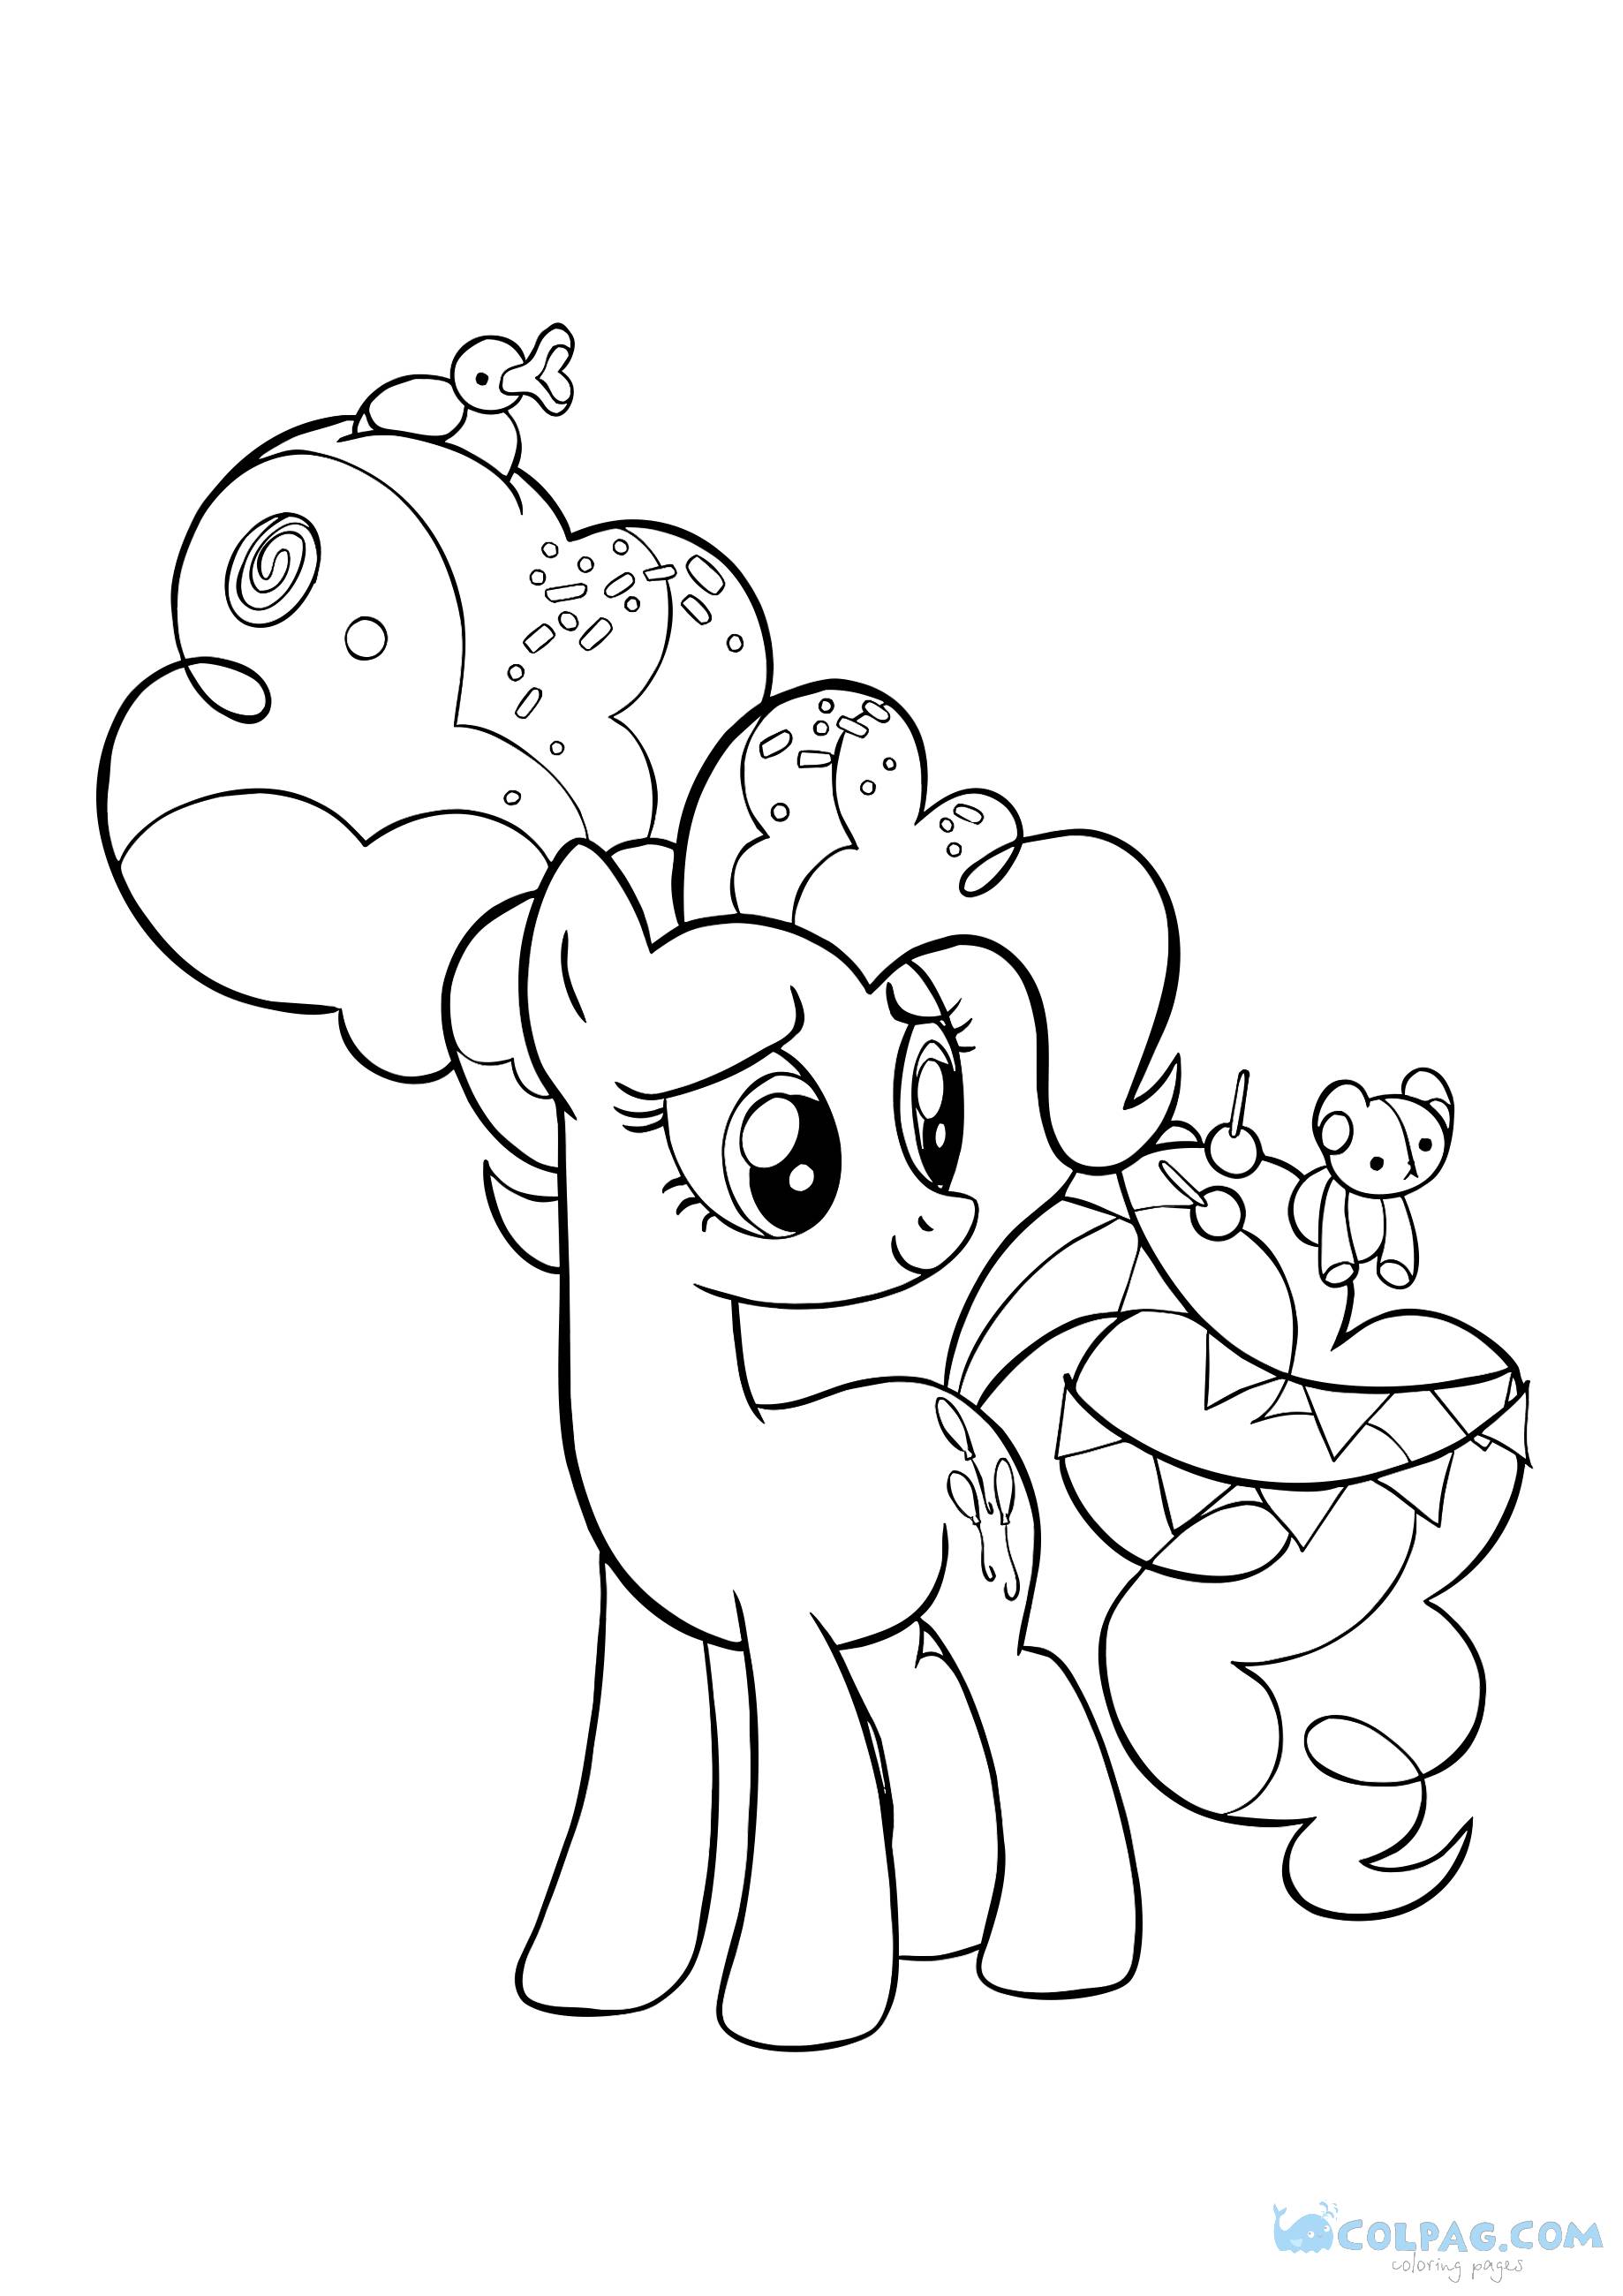 Pinky Pie Coloring Pages to Print